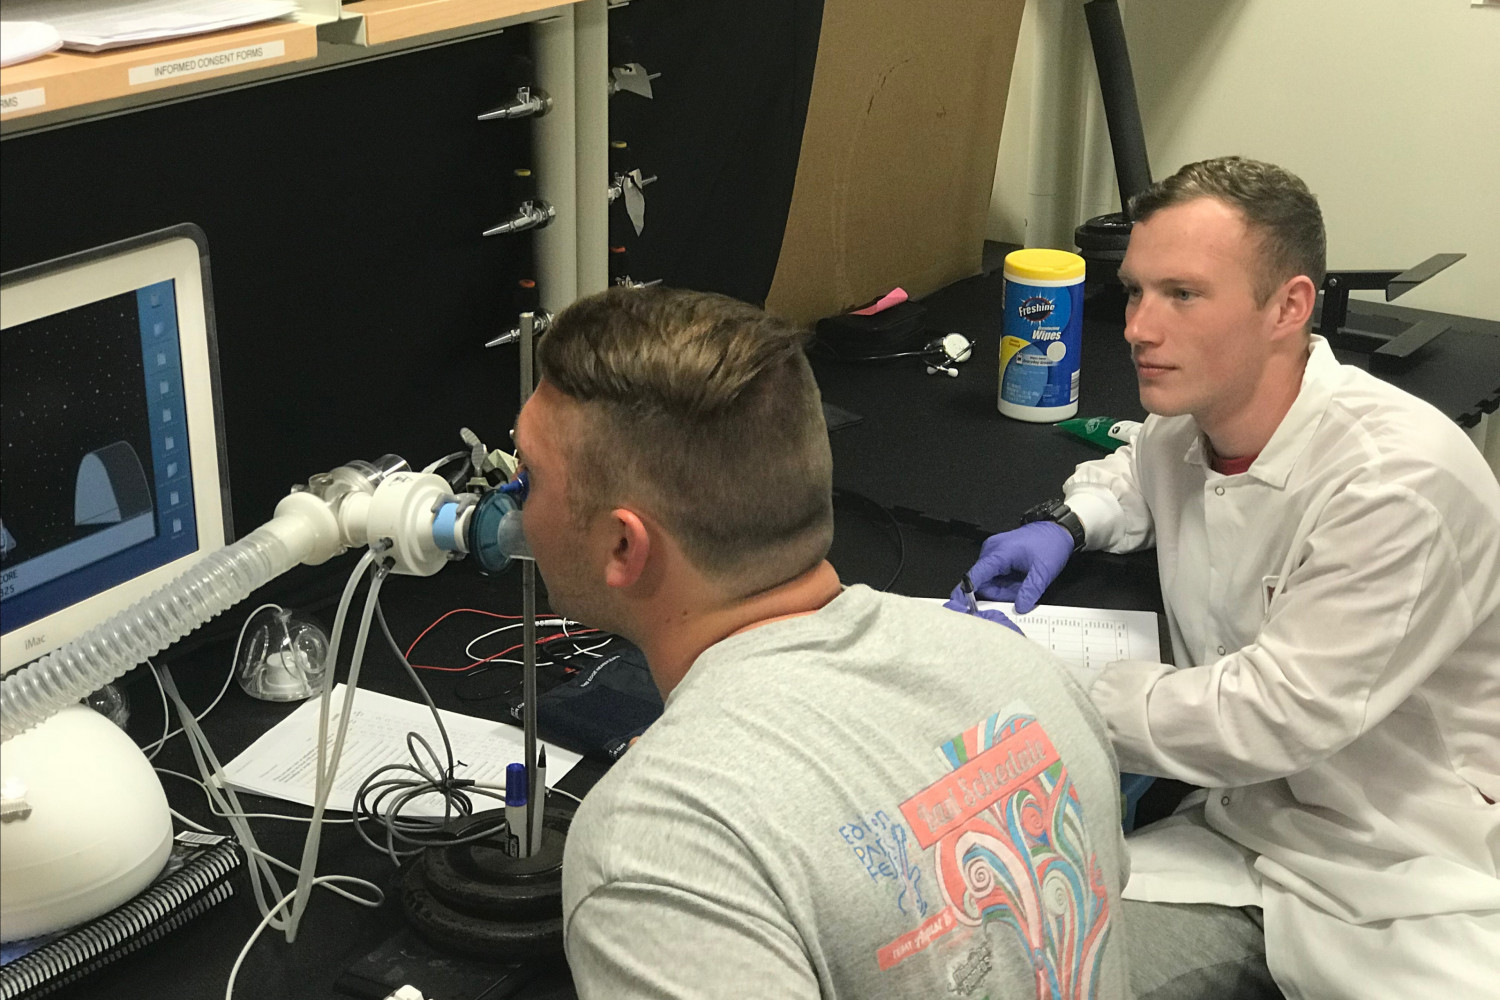 Carthage students gaining hands-on research experience in the neurophysiology laboratory.